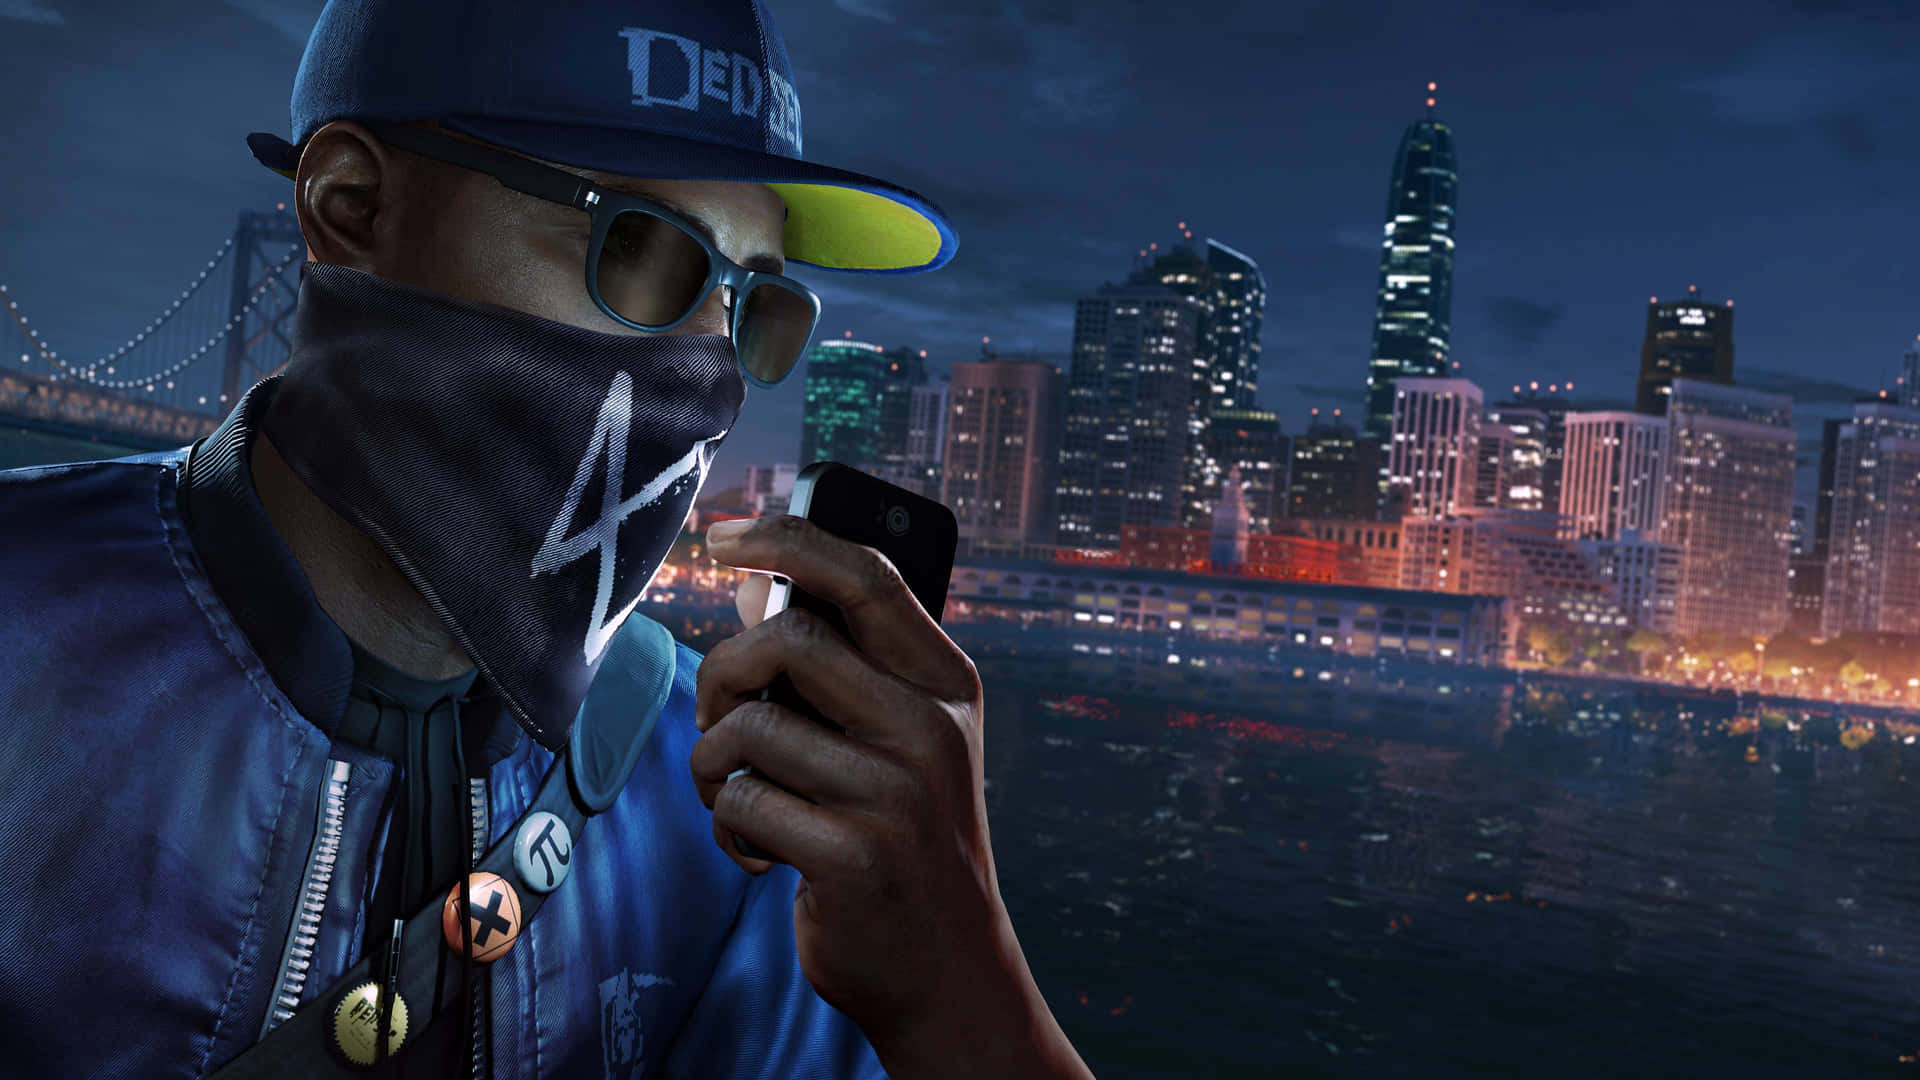 Cool Ps4 Character Marcus Holloway From Watch Dogs 2 Game Wallpaper